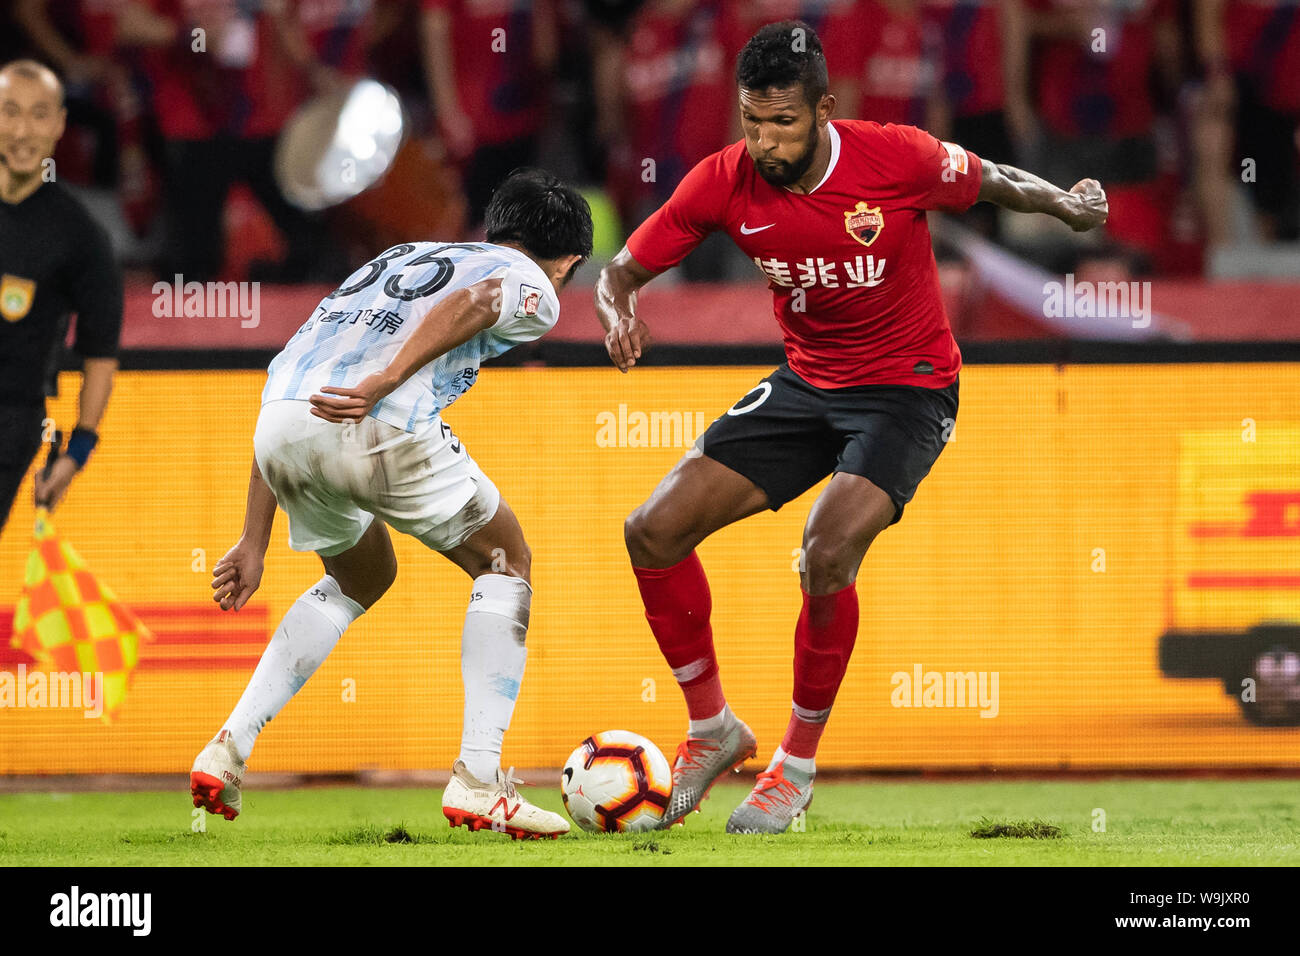 Brazilian-born Portuguese football player Dyego Sousa of Shenzhen F.C., right, chases after the ball in the 22nd round match during the 2019 Chinese Football Association Super League (CSL) in Shenzhen city, Guandong province, China, 14 August 2019. Stock Photo